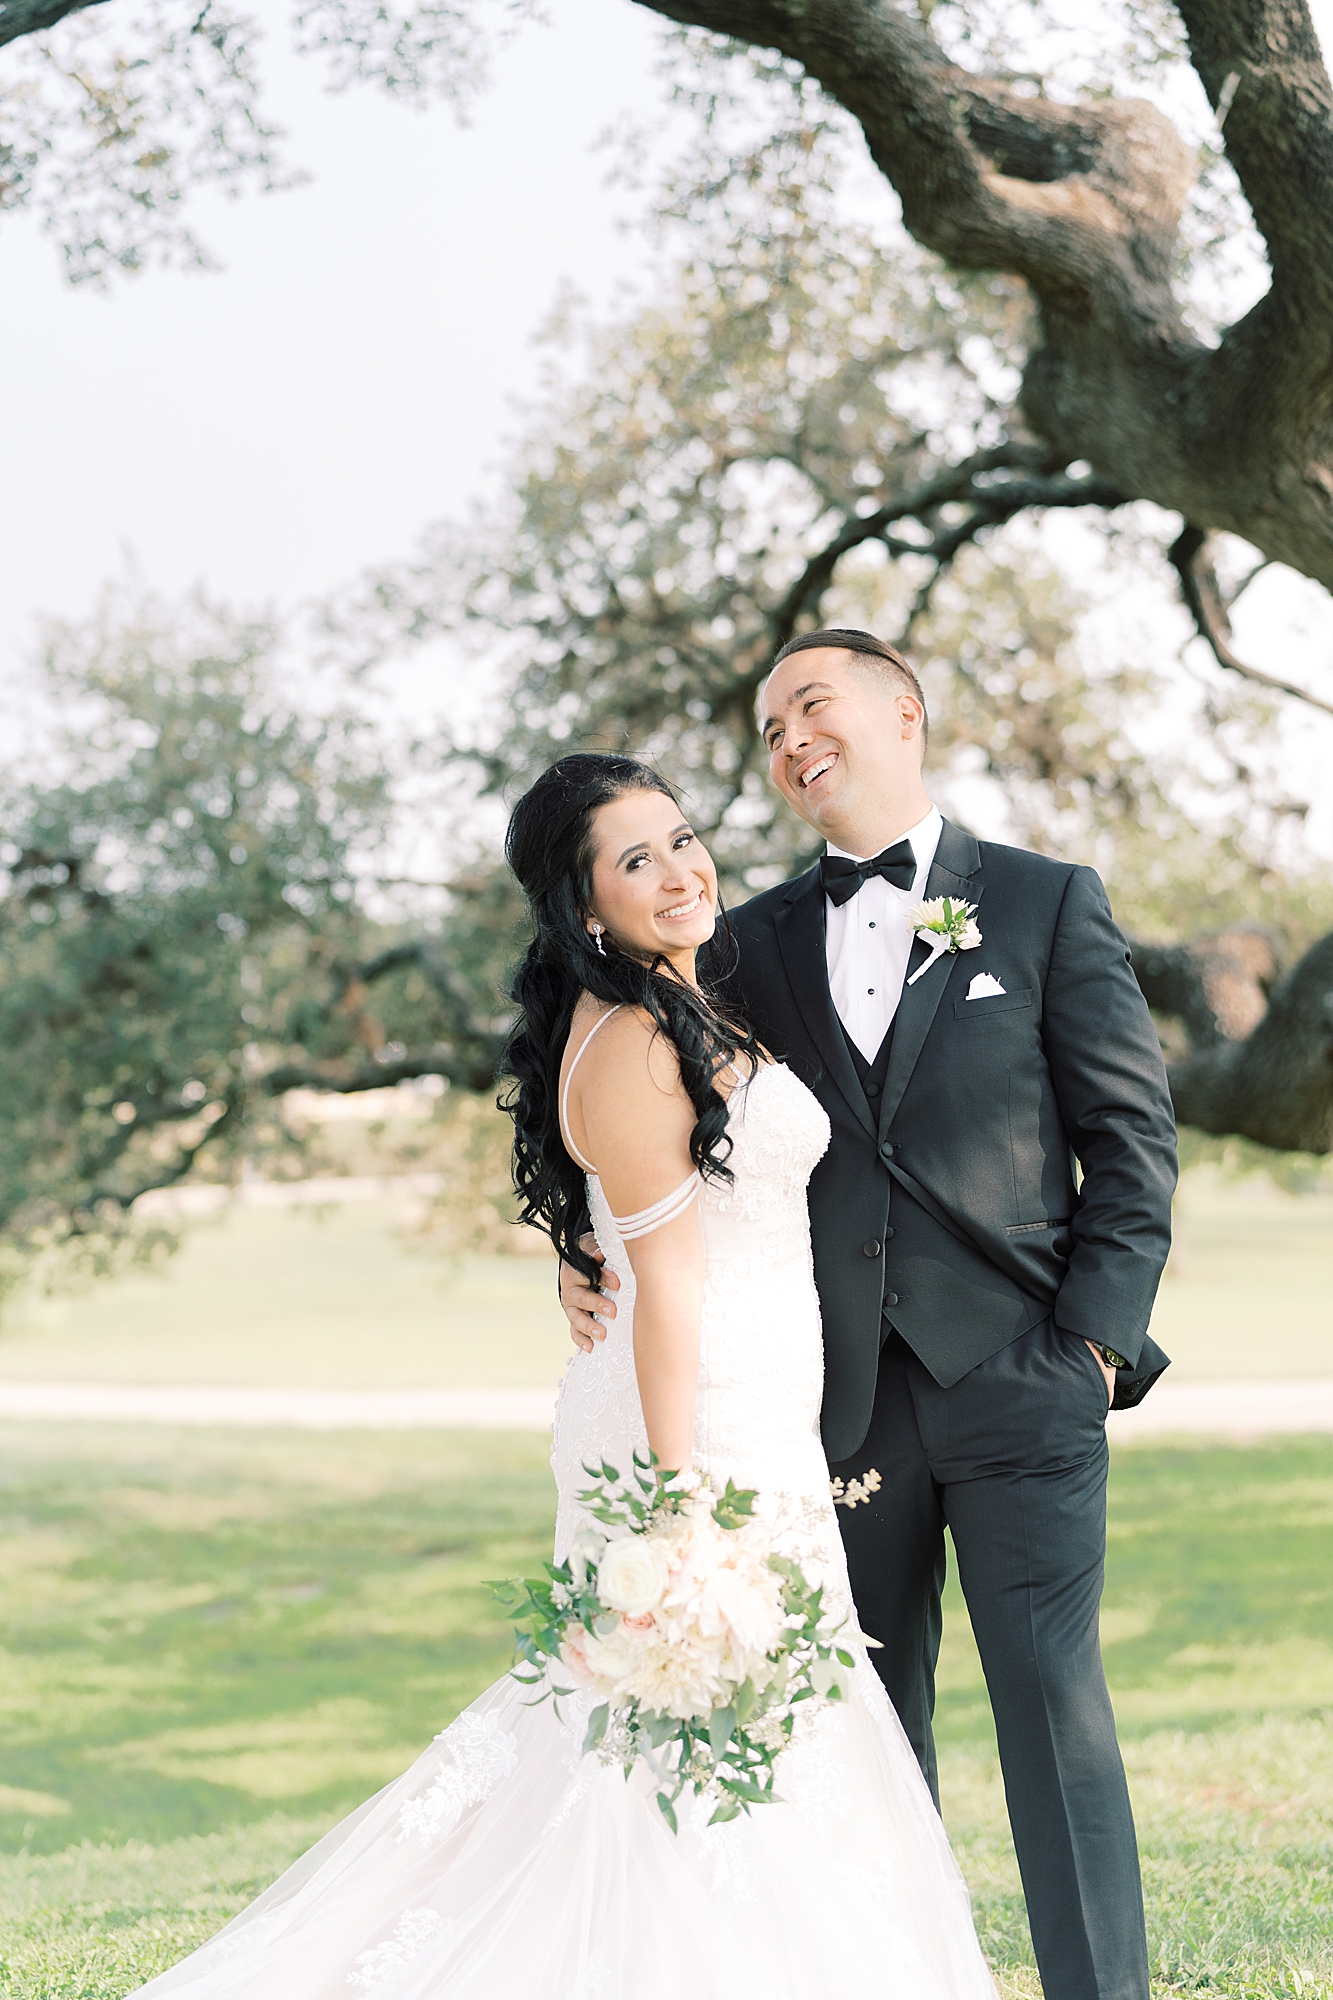 You have to see just how gorgeous the sunset was on this La Bonne Vie Ranch wedding day in Fredericksburg, TX! The sunset portraits are so perfect, and match the energy this loving couple has! Click through to see the most perfect day! #Fredericksburgtx #labonnevie